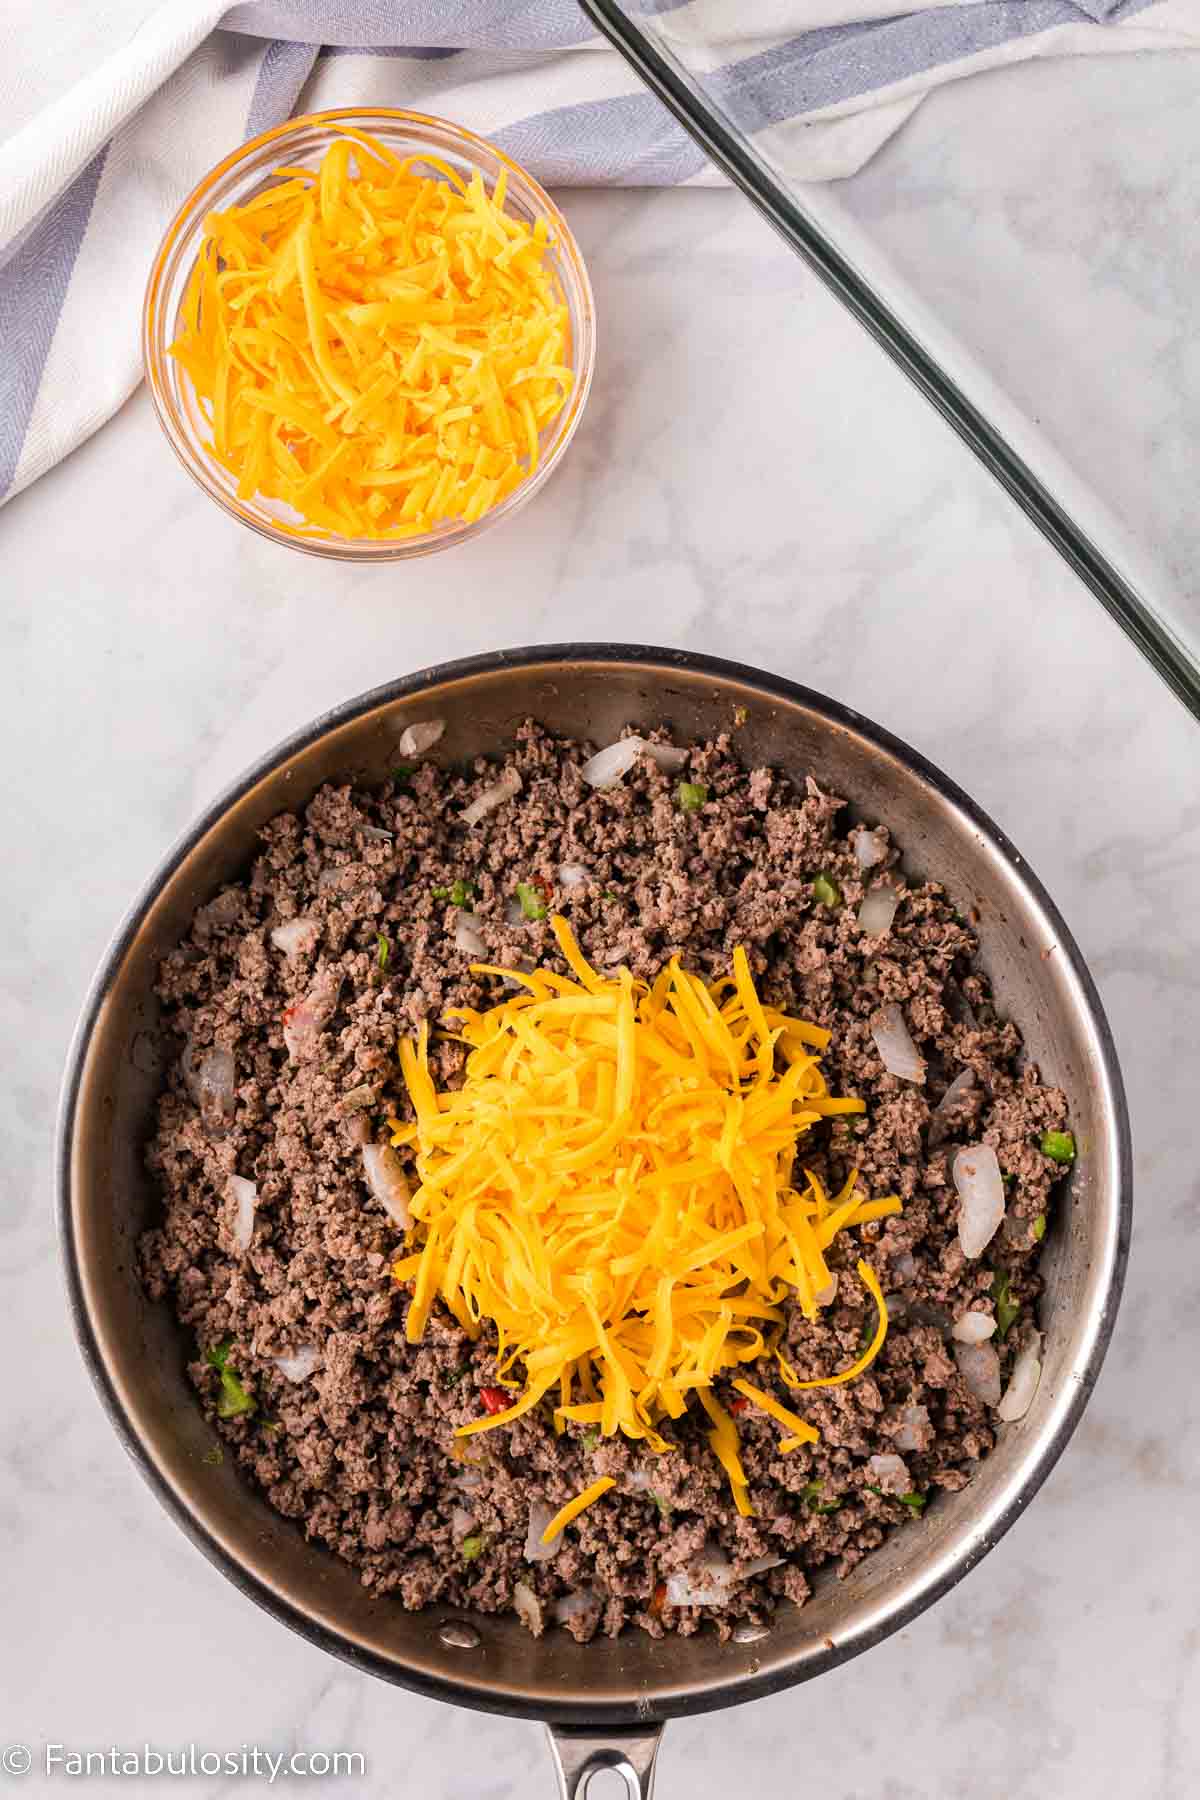 Shredded cheddar on top of browned ground beef.